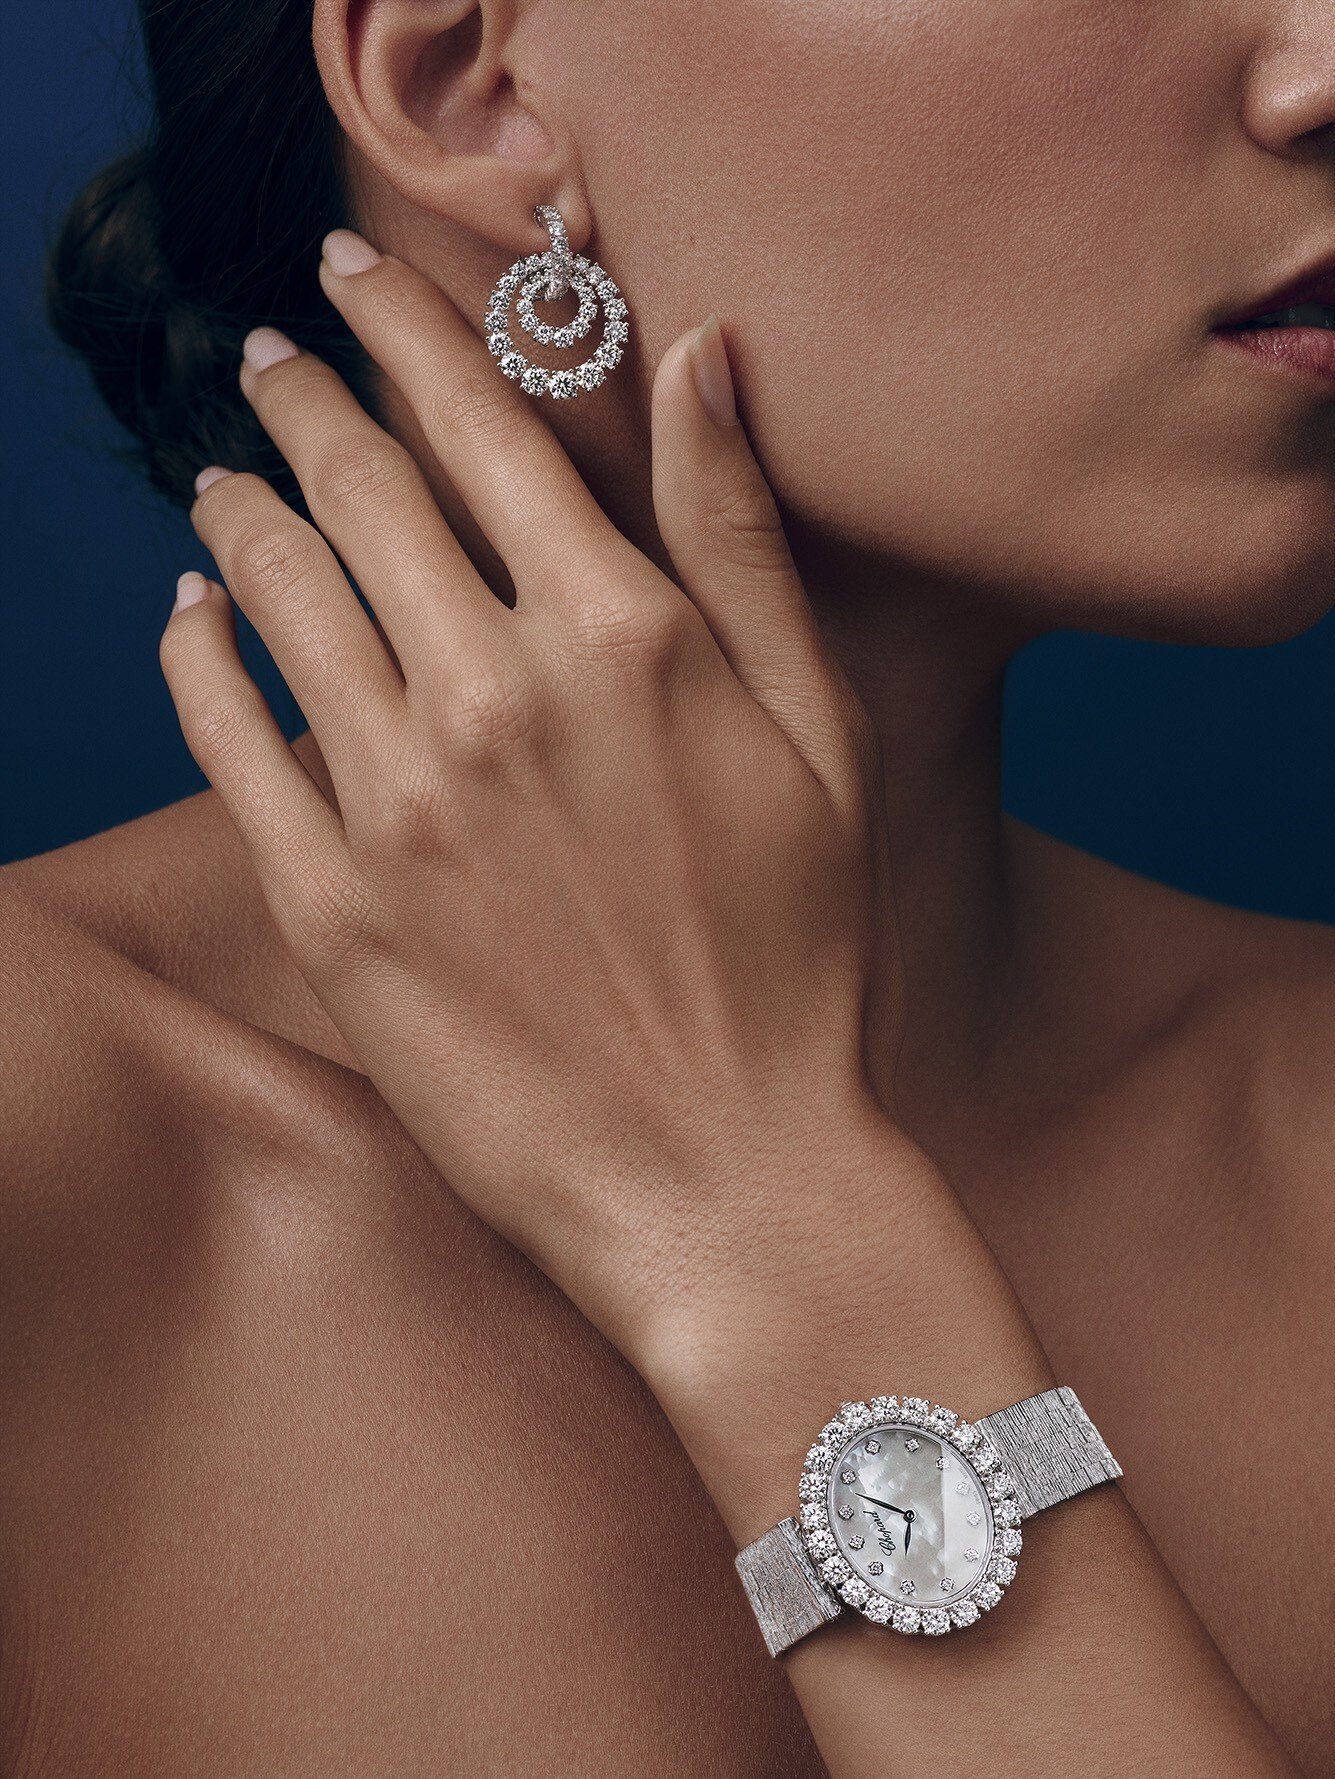 A design from the Chopard L'Heure du Diamant collection, launched along with pieces in the Happy Hearts Wings and Haute Joaillerie collections. Photo: Régis Golay